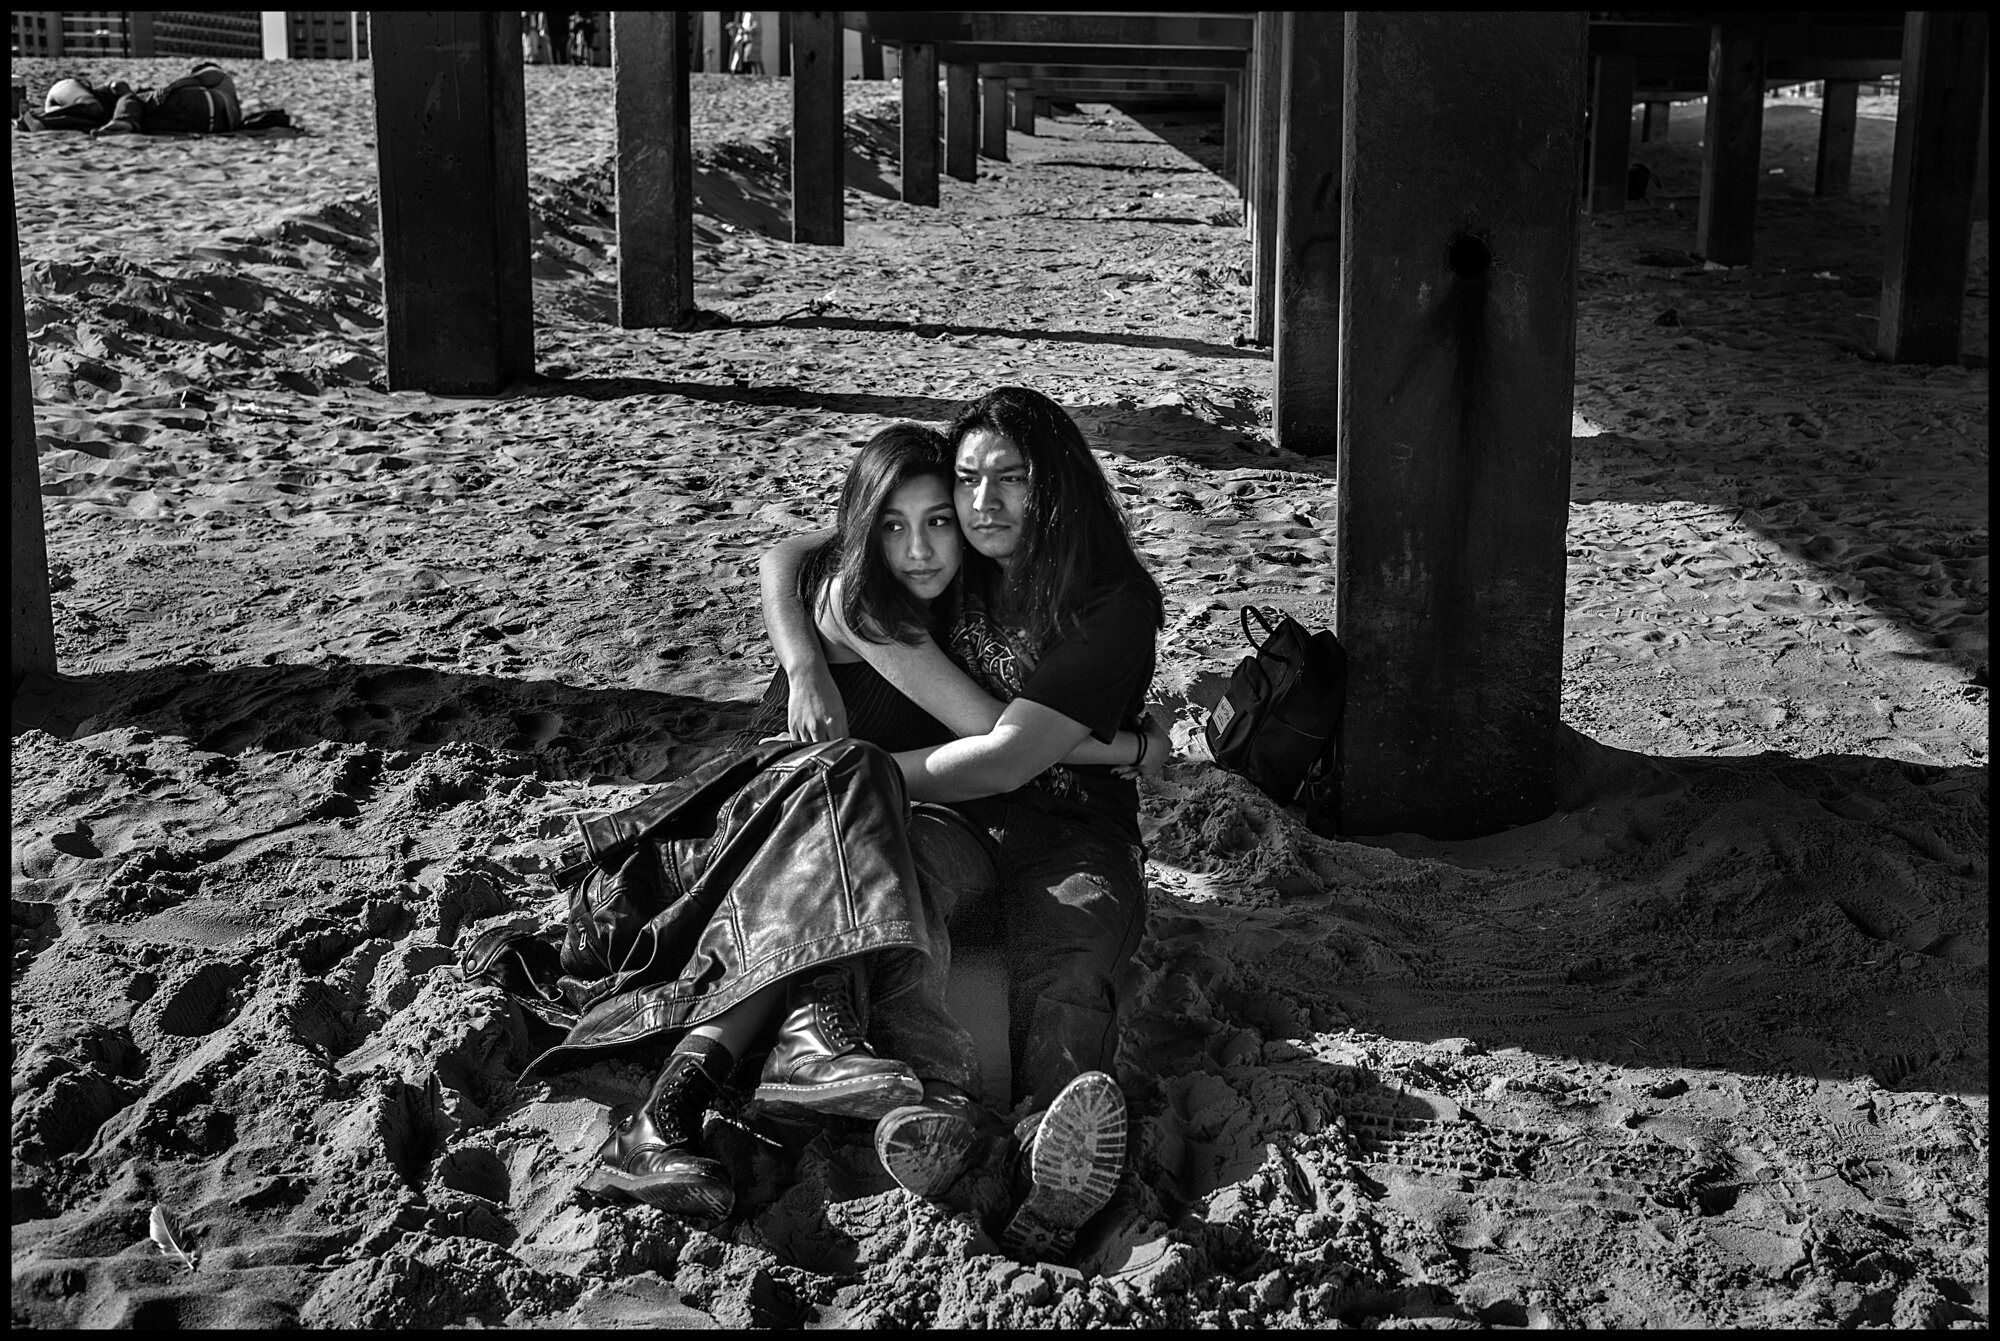  Daniel, 20 and Melissa, 18, met for the first time only shortly before the quarantine began. This was their first date in person. Coney Island, New York.  May 16, 2020. © Peter Turnley.  ID# 49-002 